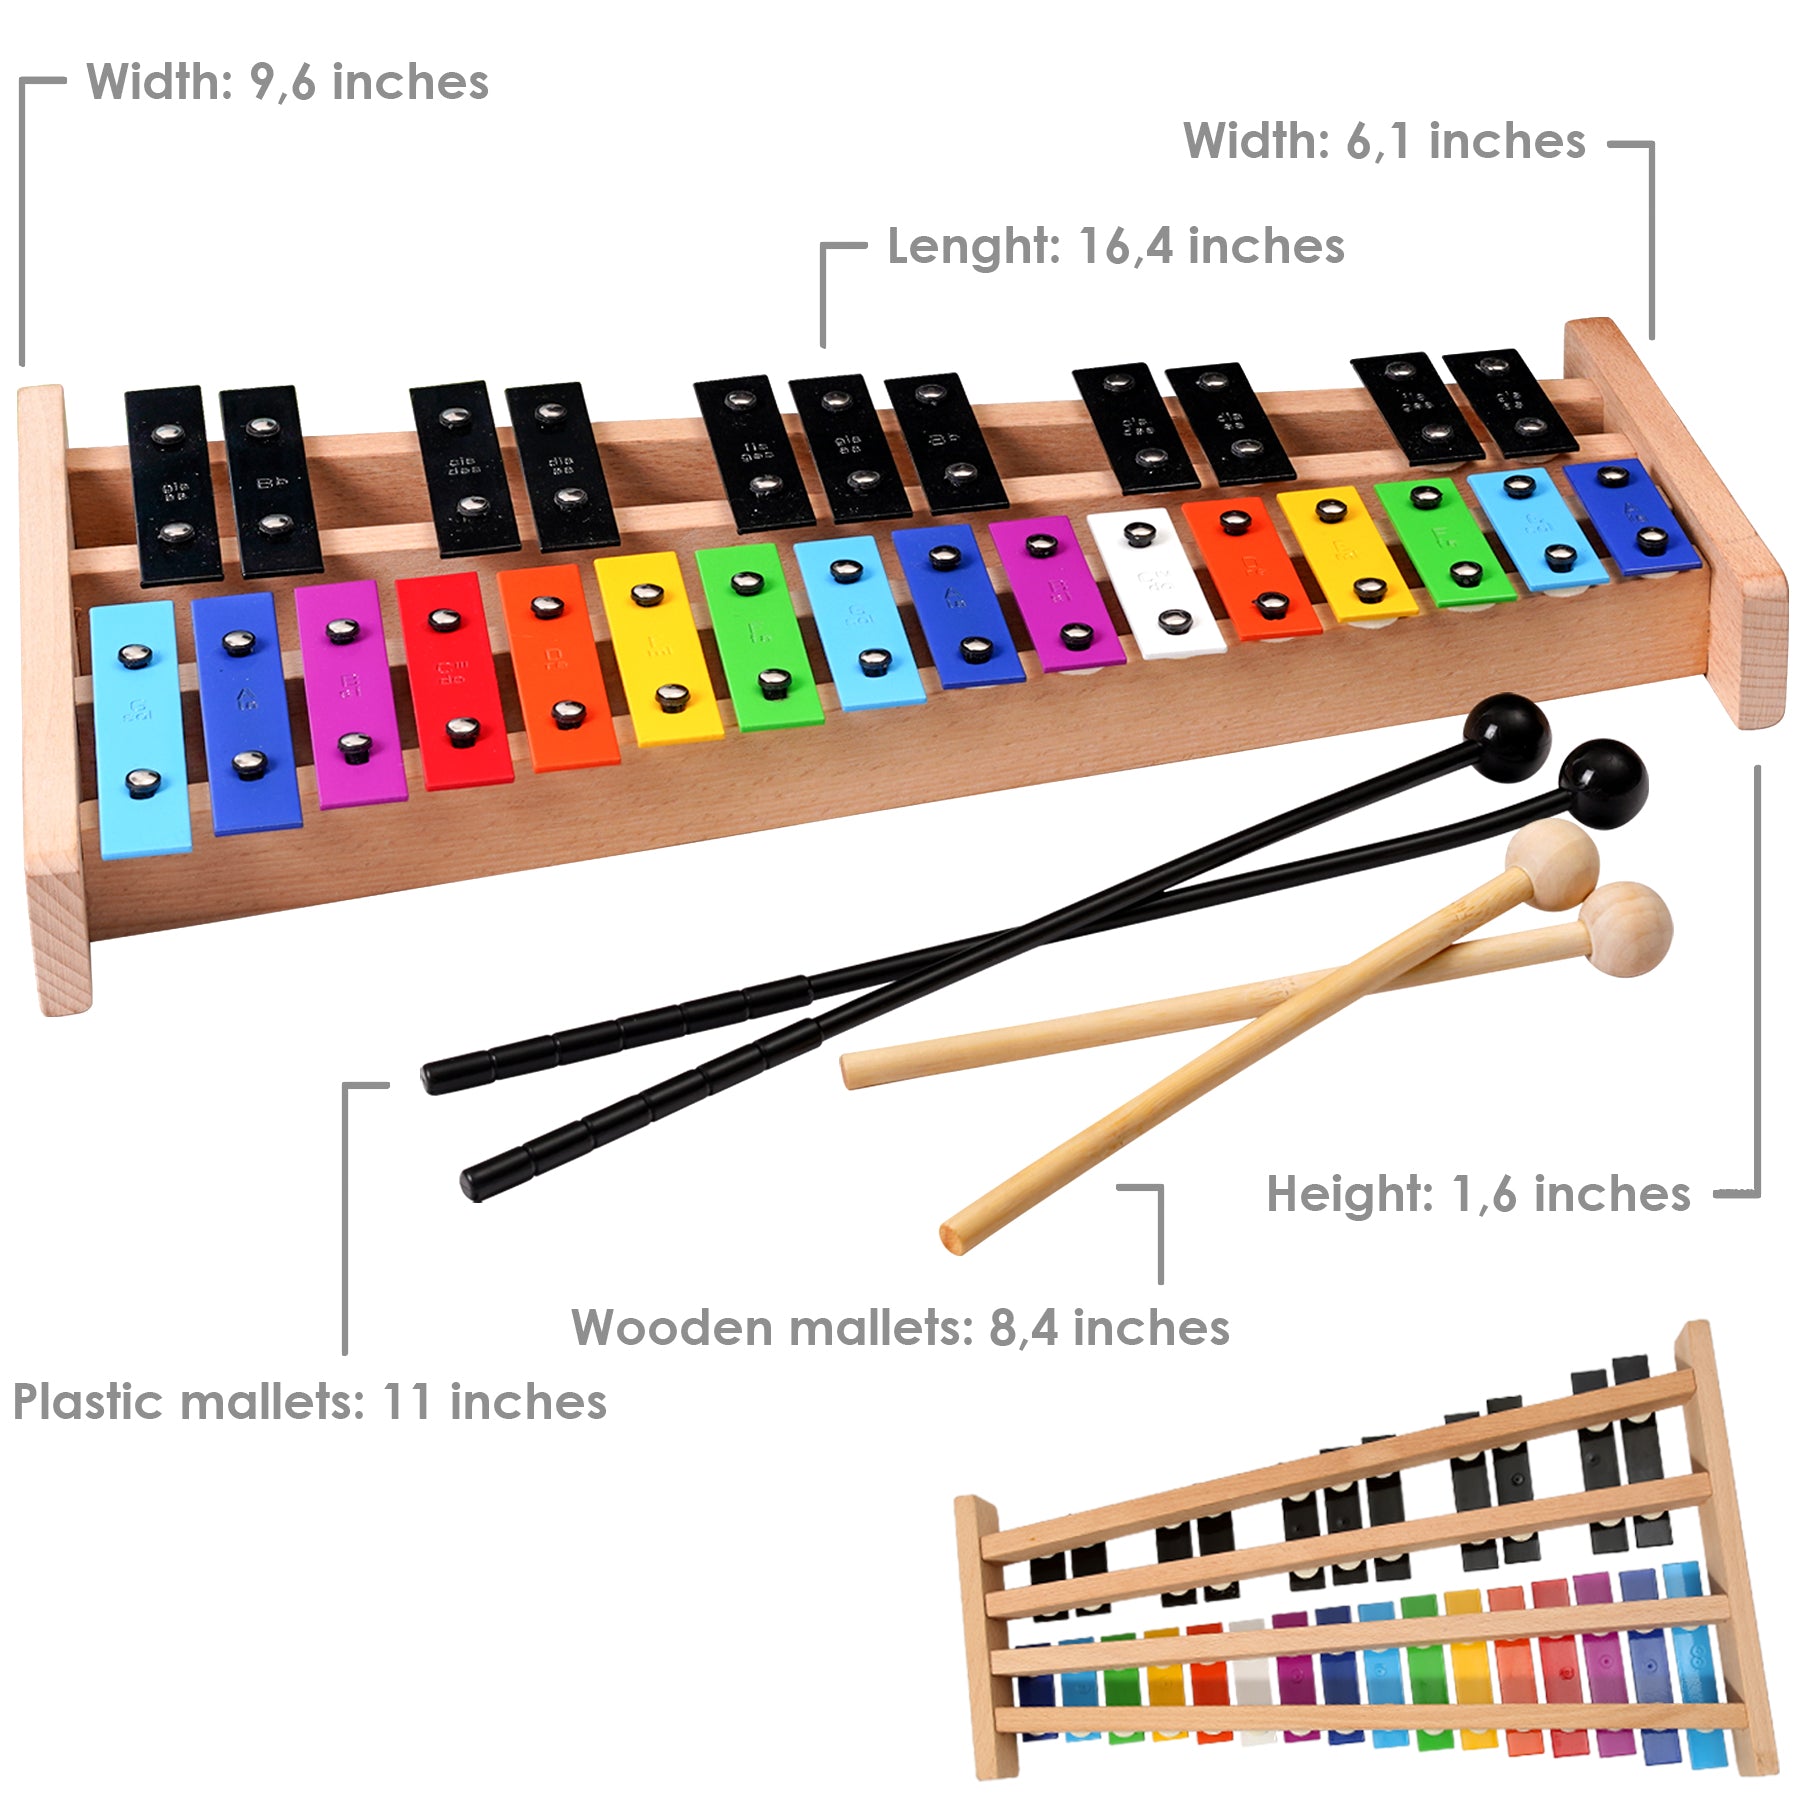 Professional Wooden Soprano Full Size Glockenspiel Xylophone with 27 Metal  Keys - Musical Instrument for Adults & Kids - Includes 2 Wooden